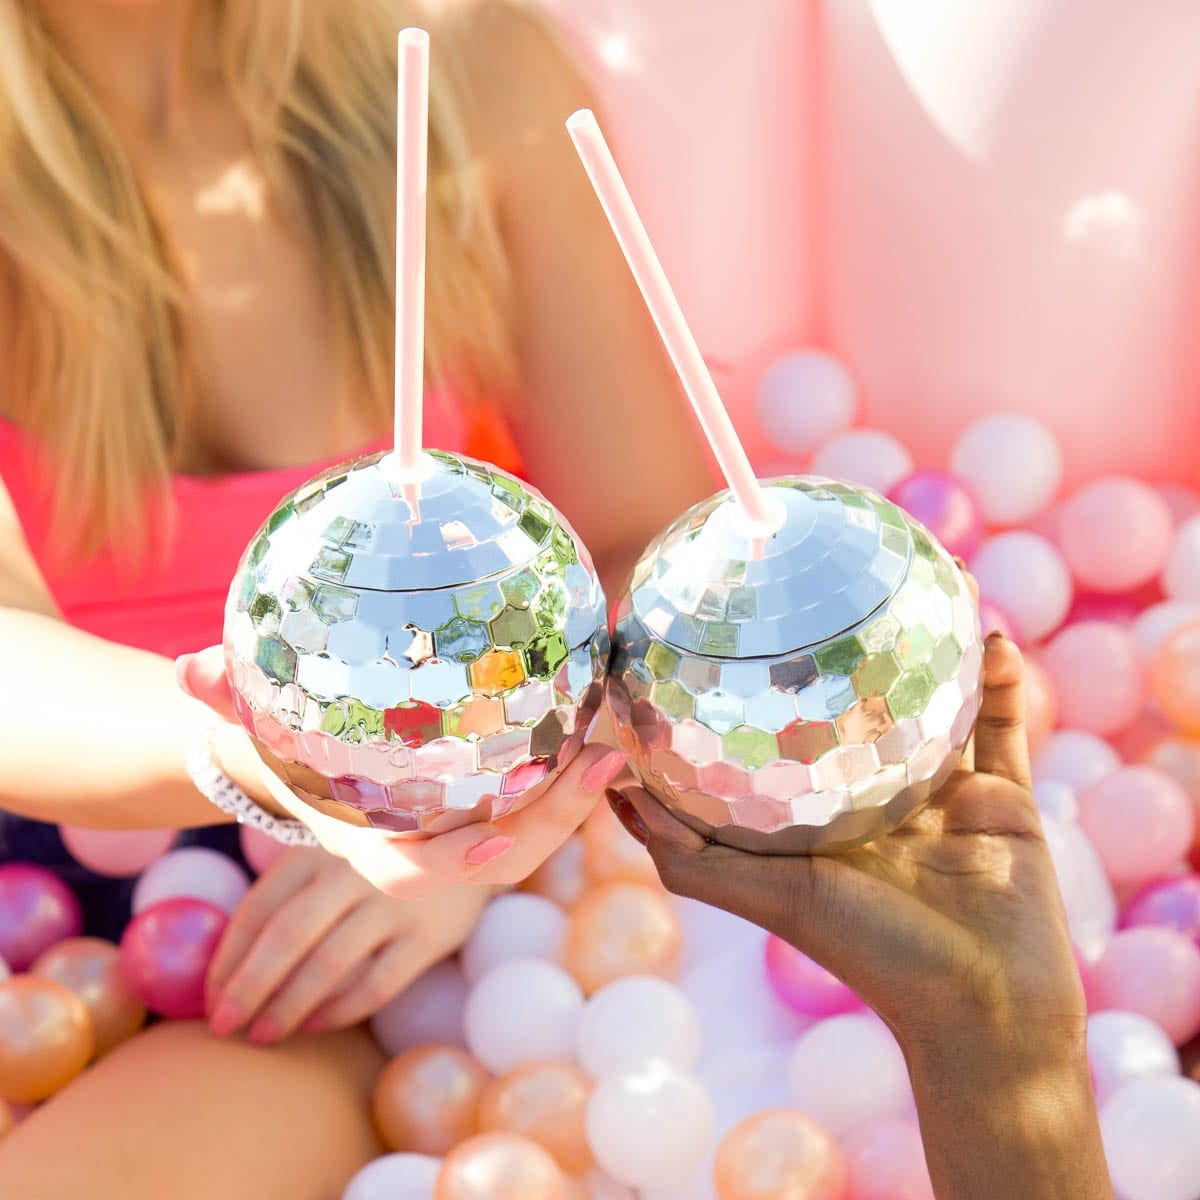 Promotion Disco Ball Drink Tumbler with Straw, Colored Graduation